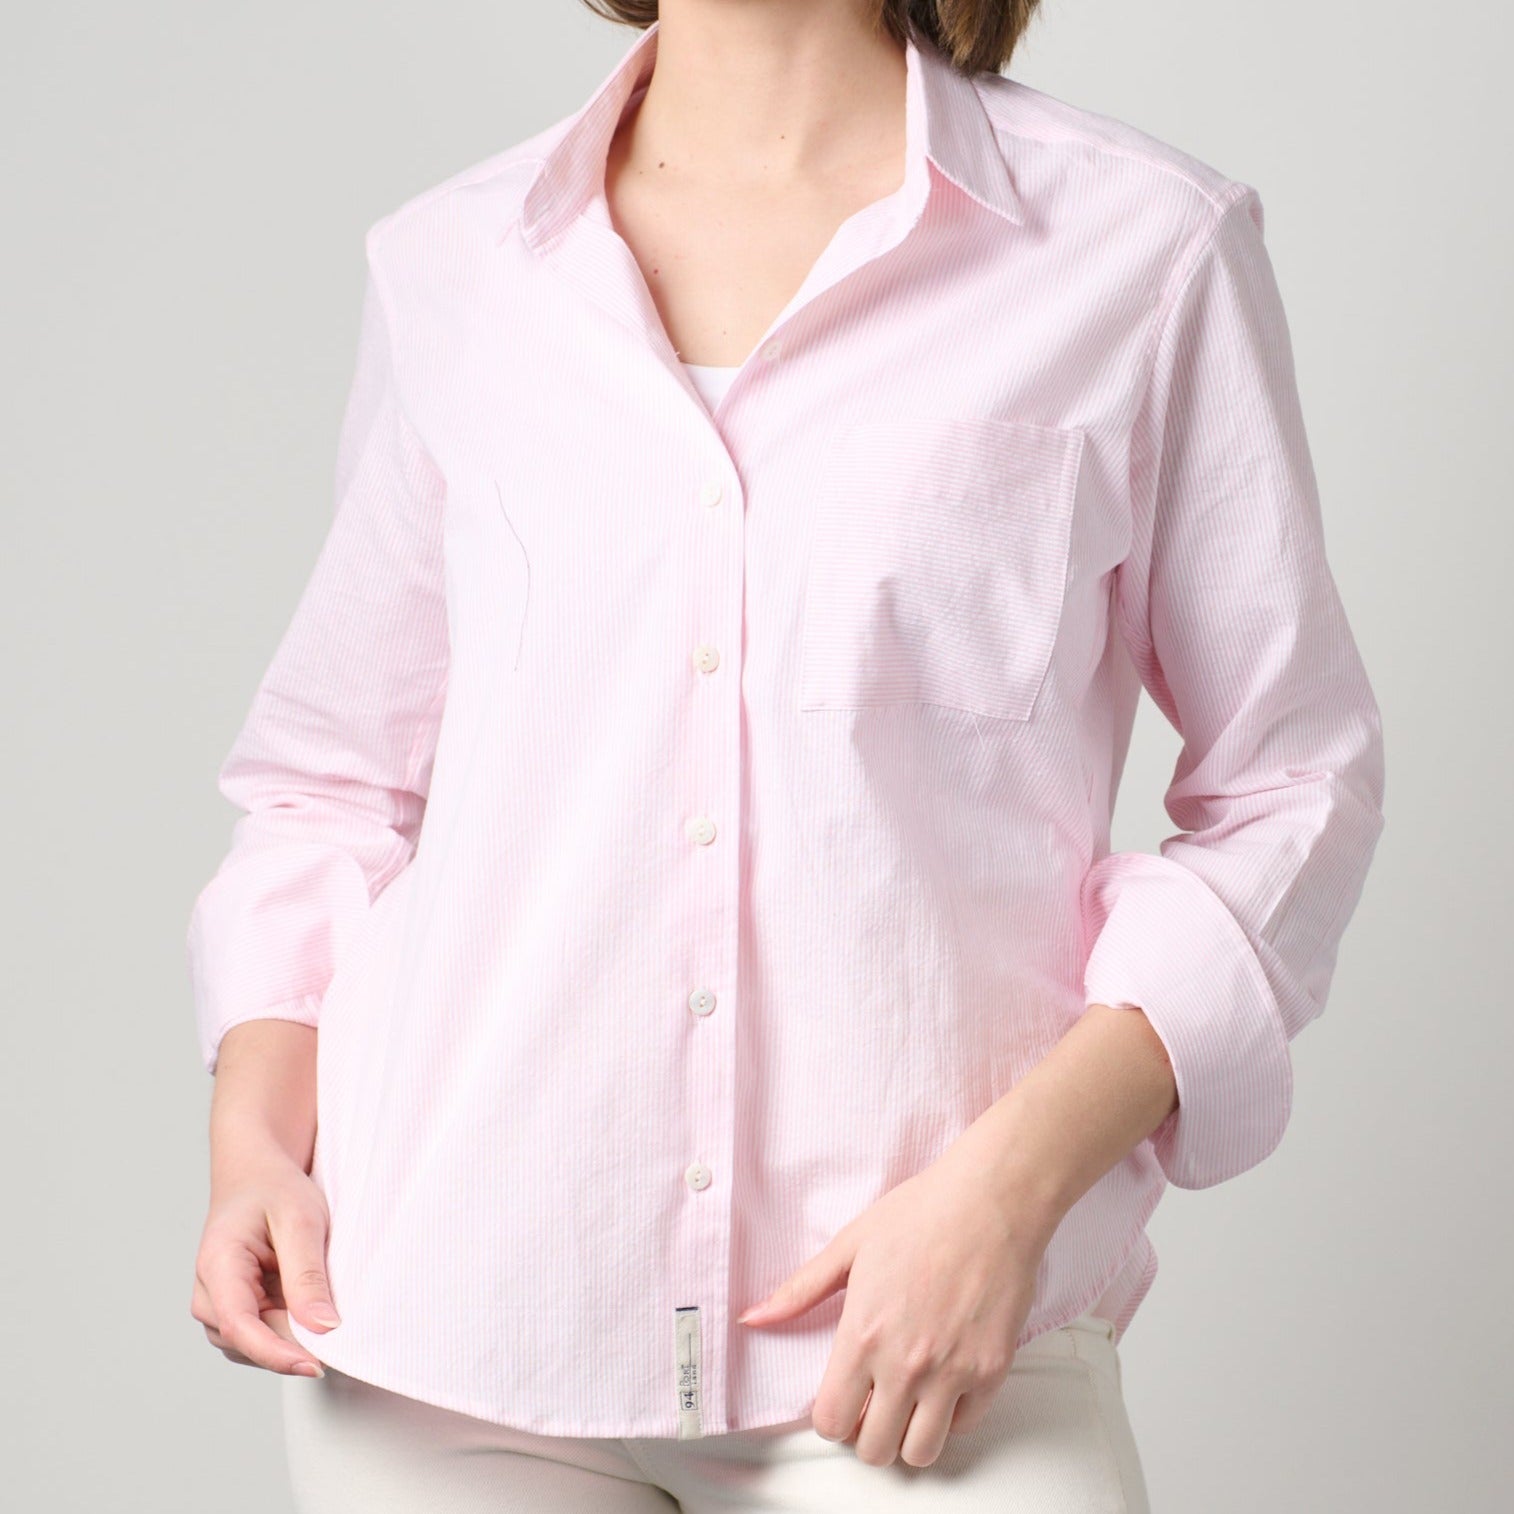 Luna Shirt in 94 Portland Collection